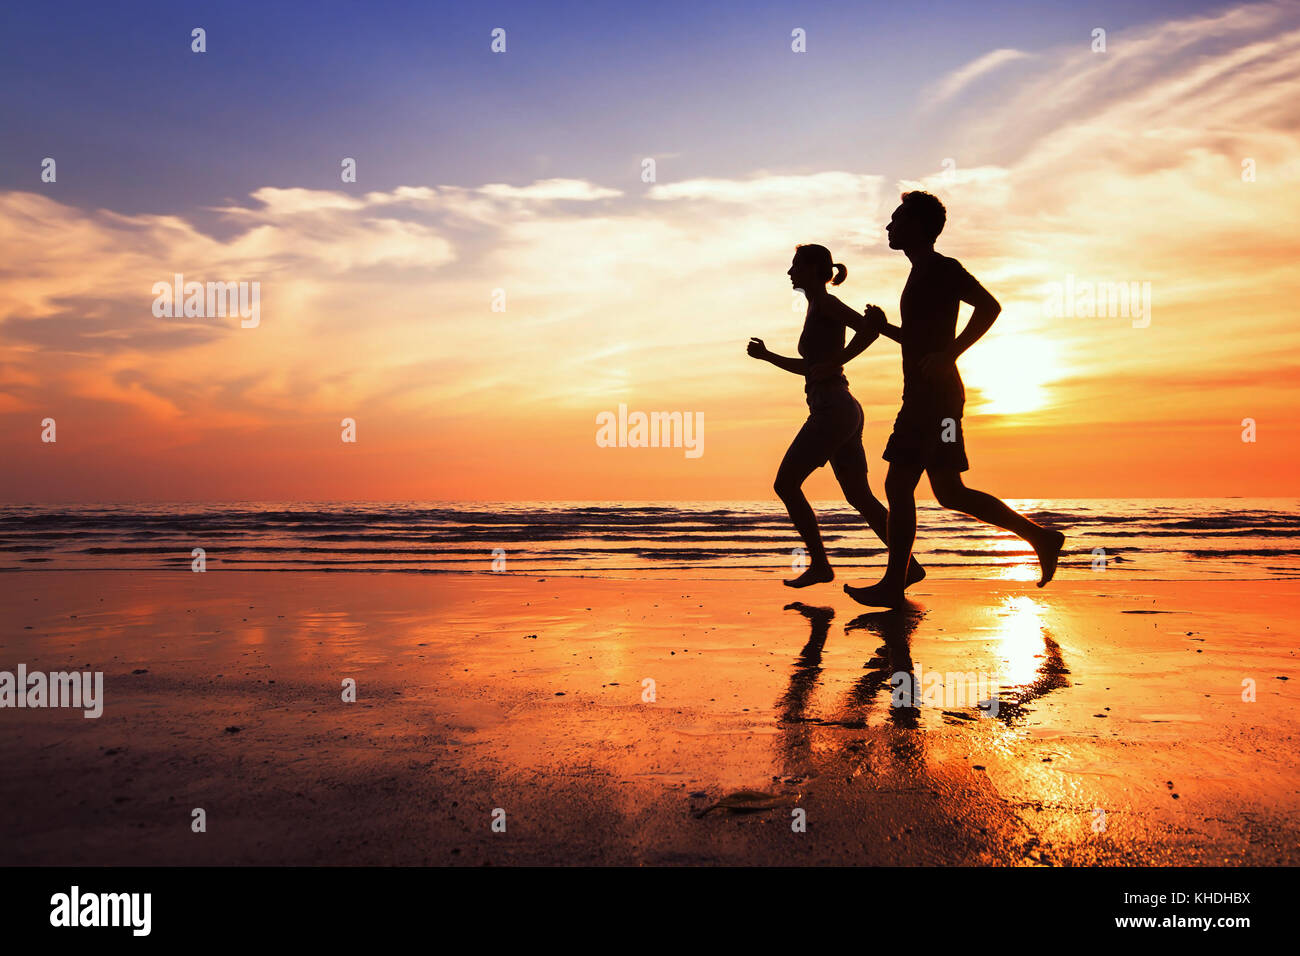 running background, sport and workout, silhouettes of people jogging at sunset beach Stock Photo